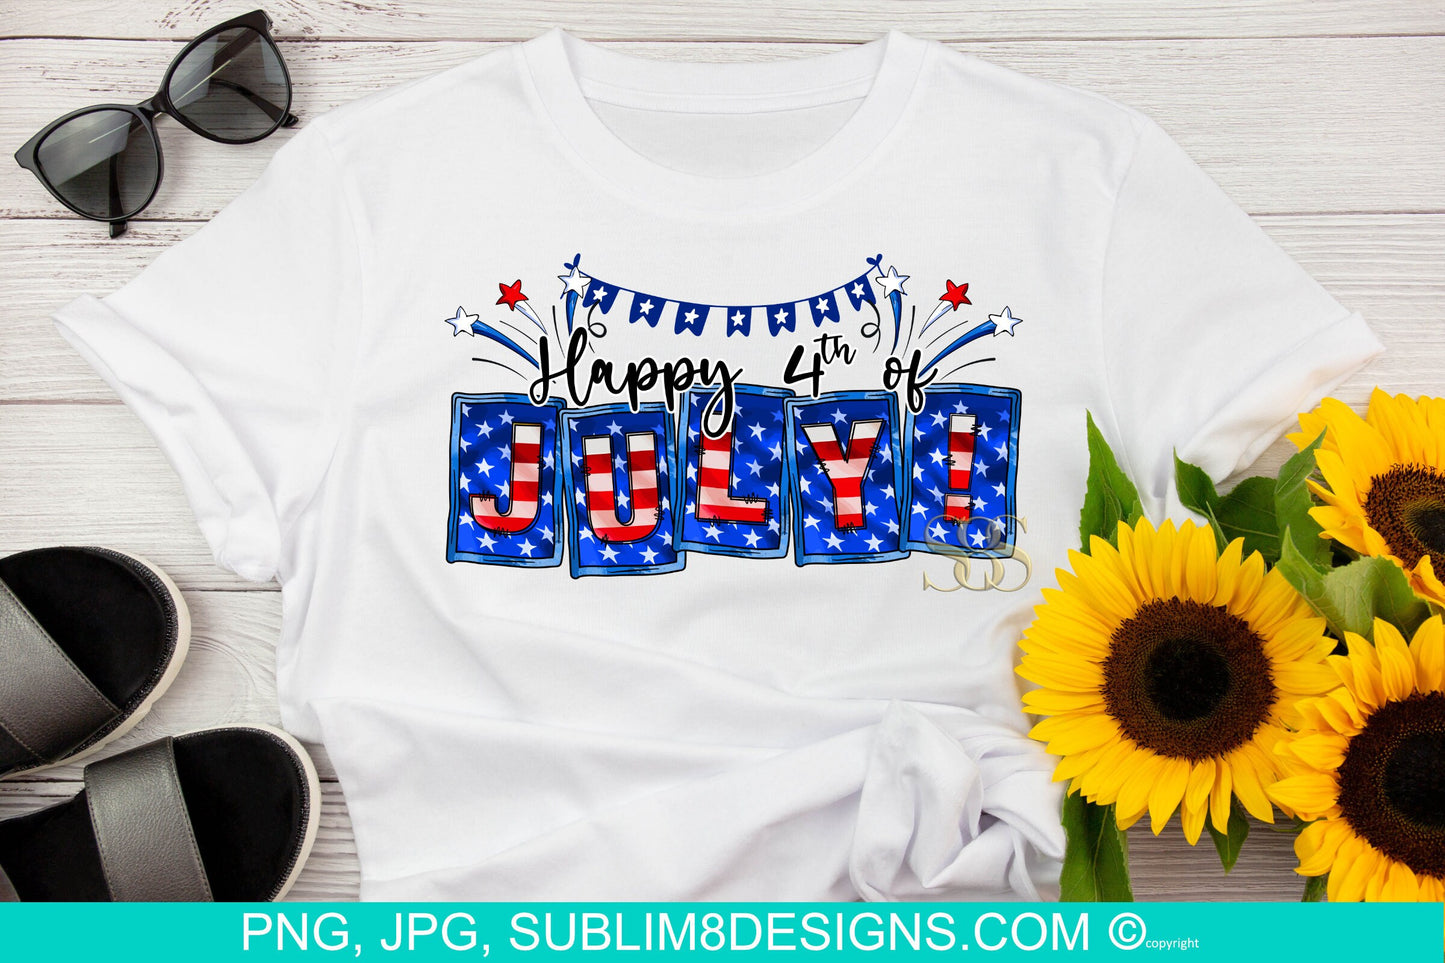 Star-Spangled July: Happy 4th Of July - A Vibrant Celebration Sublimation T-shirt Design PNG and JPEG ONLY